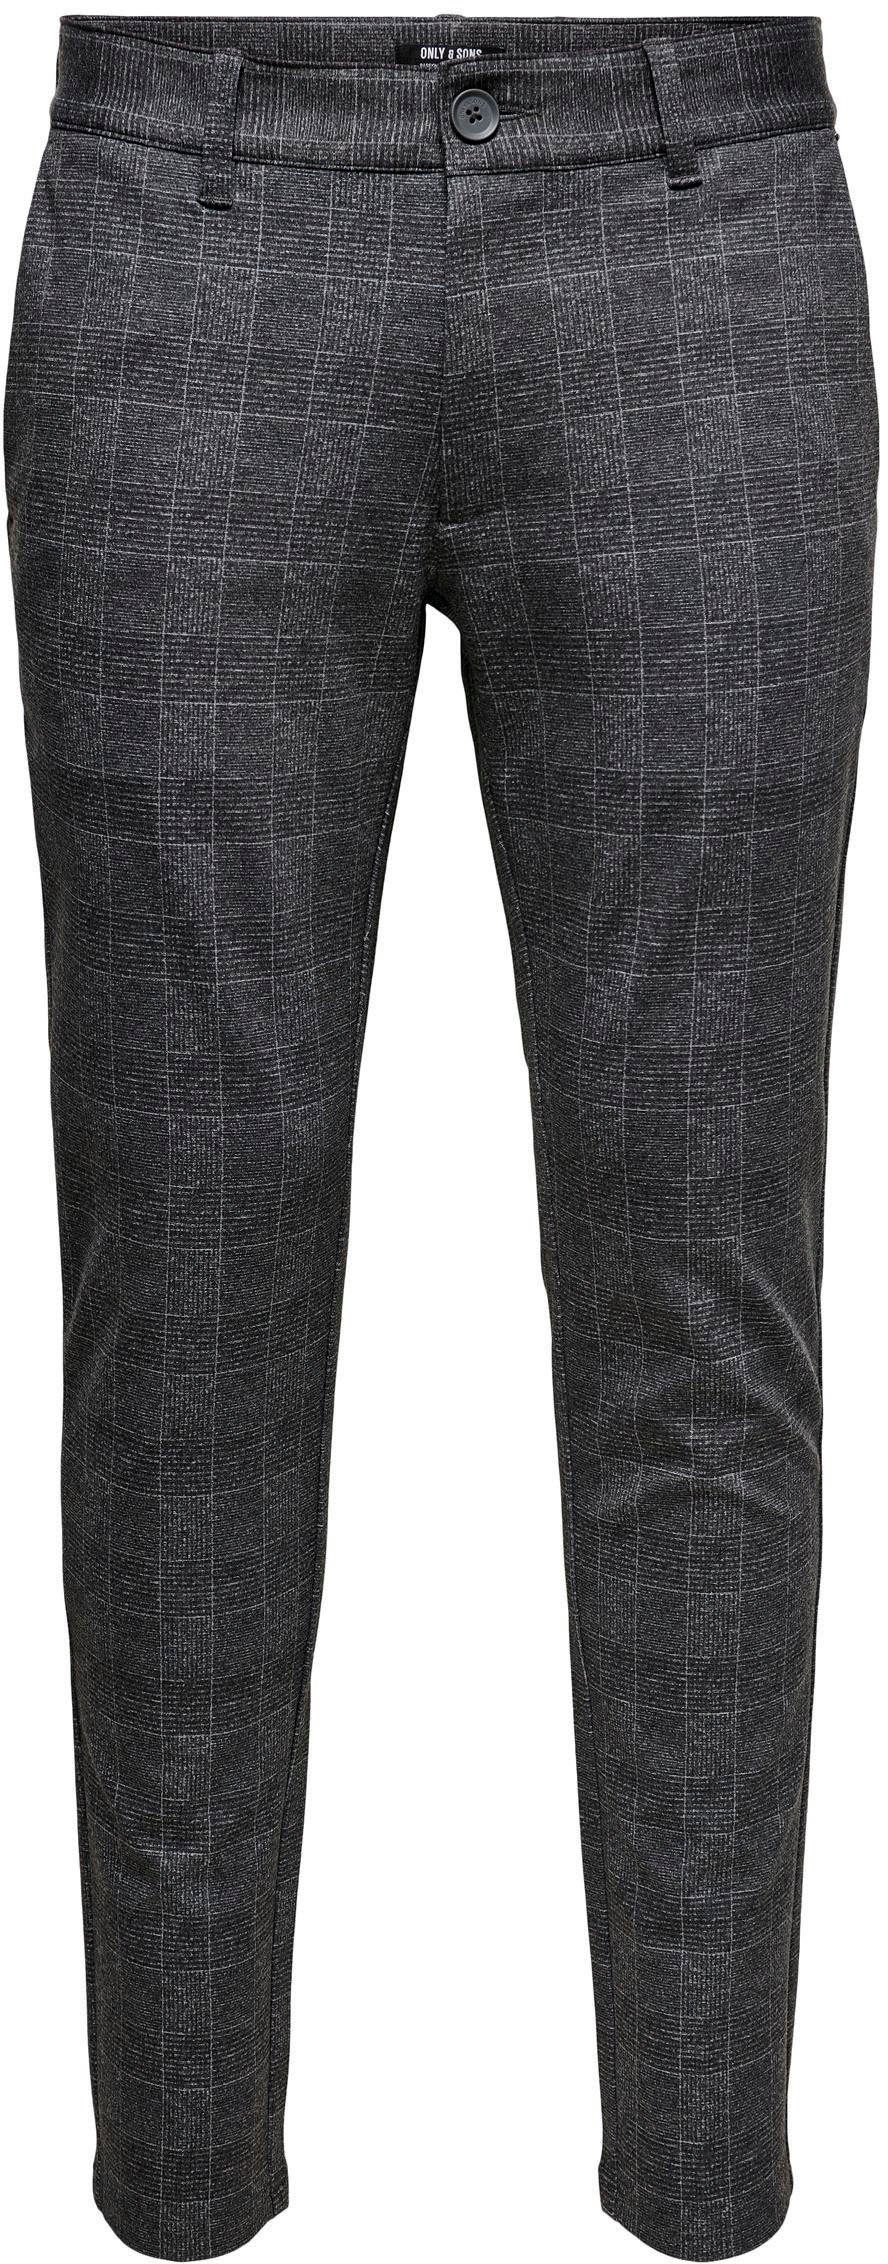 MARK CHECK ONLY schwarz-kariert Chinohose SONS PANTS &